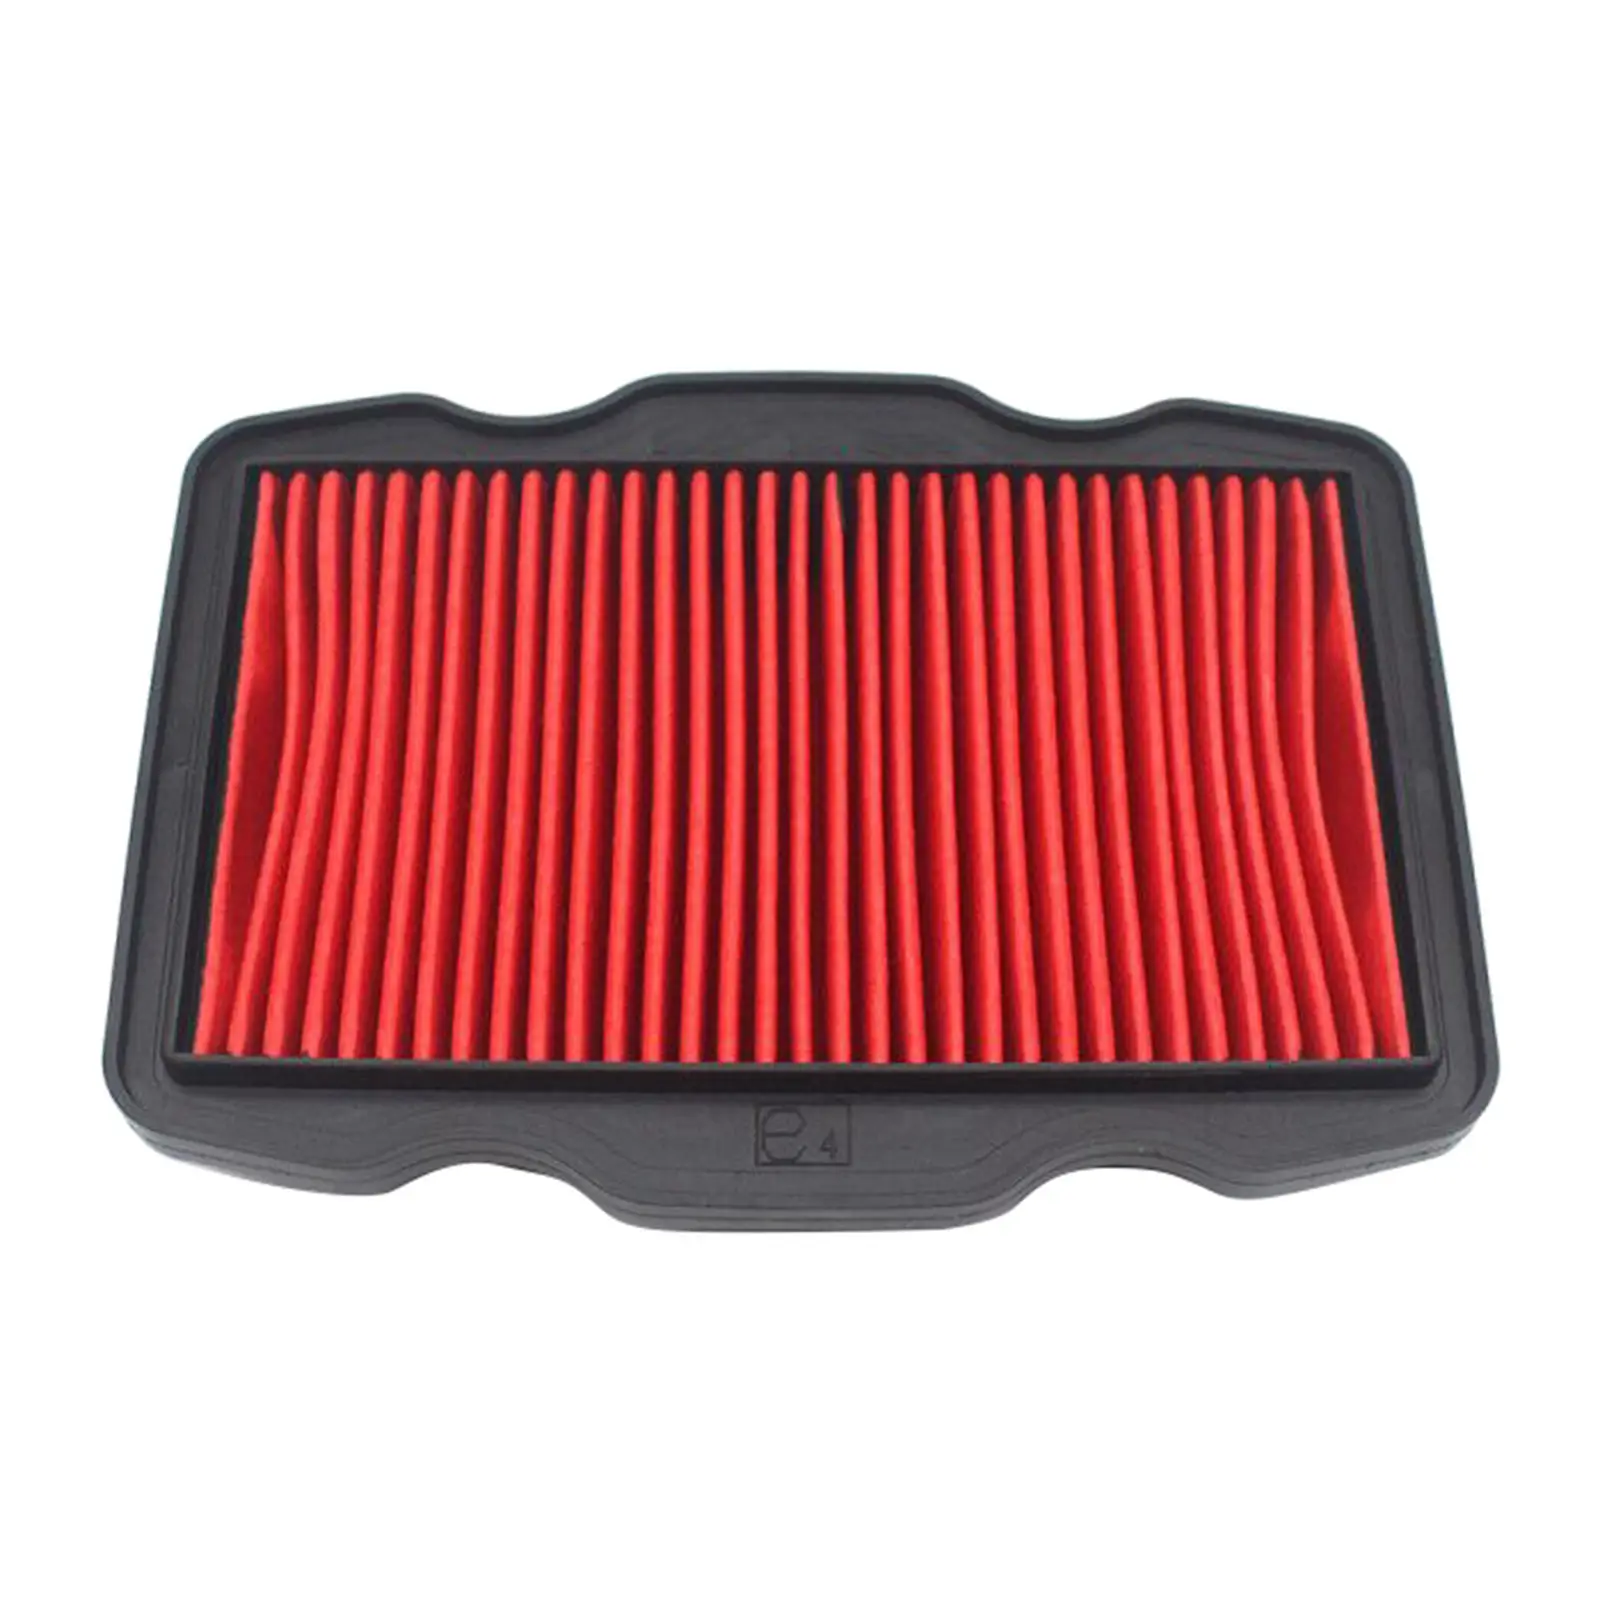 Motorcycle Air Filter Replacement Parts Accessory for Honda CB125F GLR125 15-19